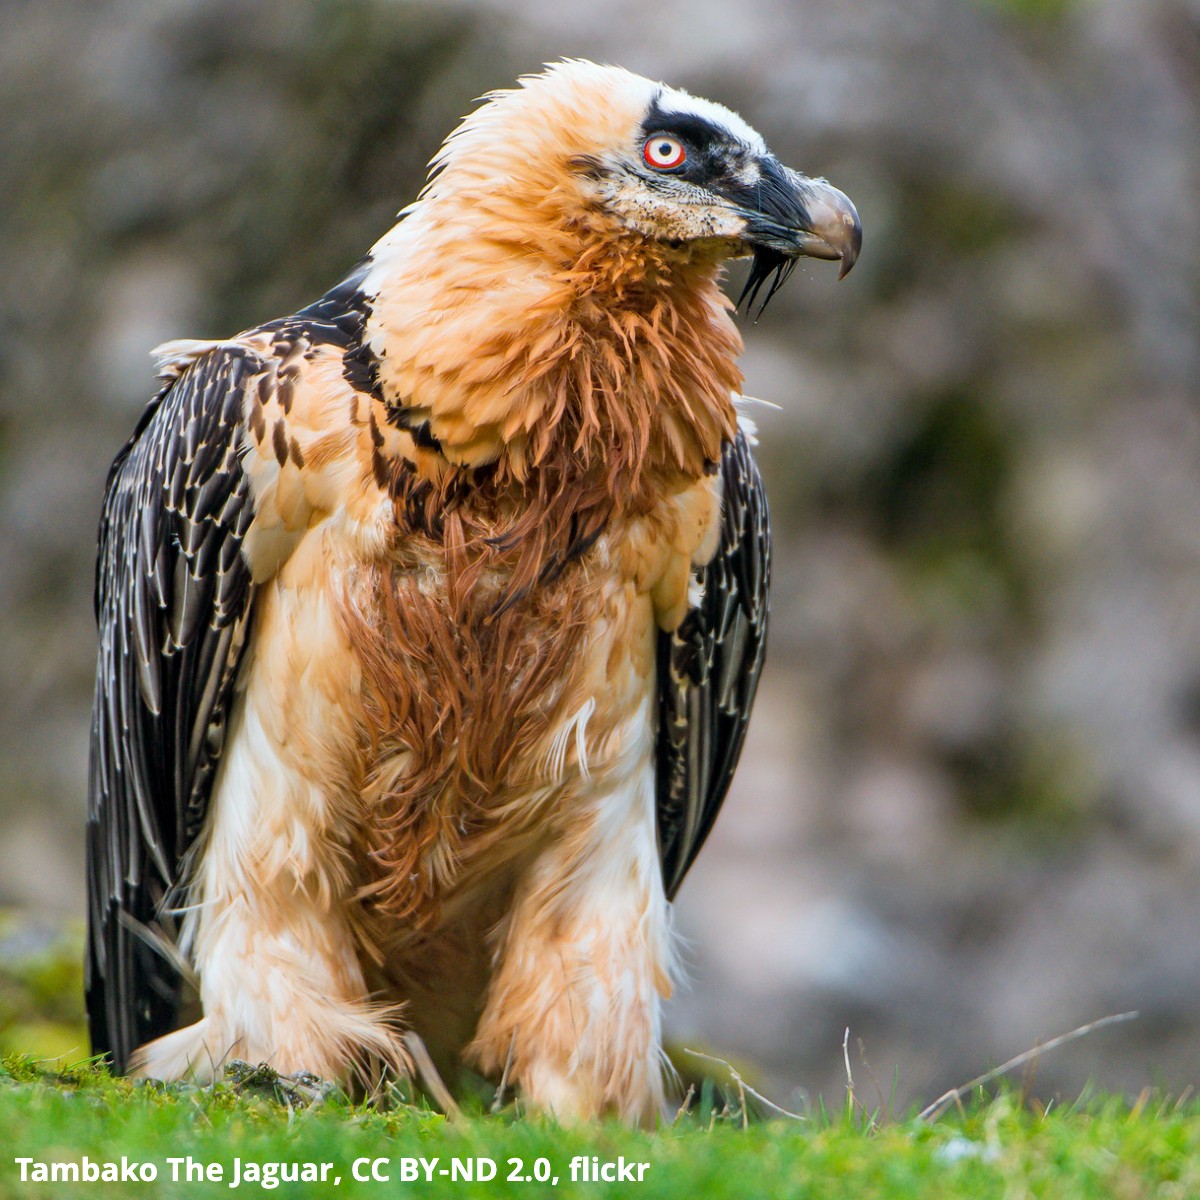 Meet the bone crushing Bearded Vulture! This bird drops bones from the sky to reach the marrow inside & to break its food into bite-sized pieces. Bones comprise an impressive 85% of its diet & its gastric fluids are so strong that it can digest bone in about 24 hours!